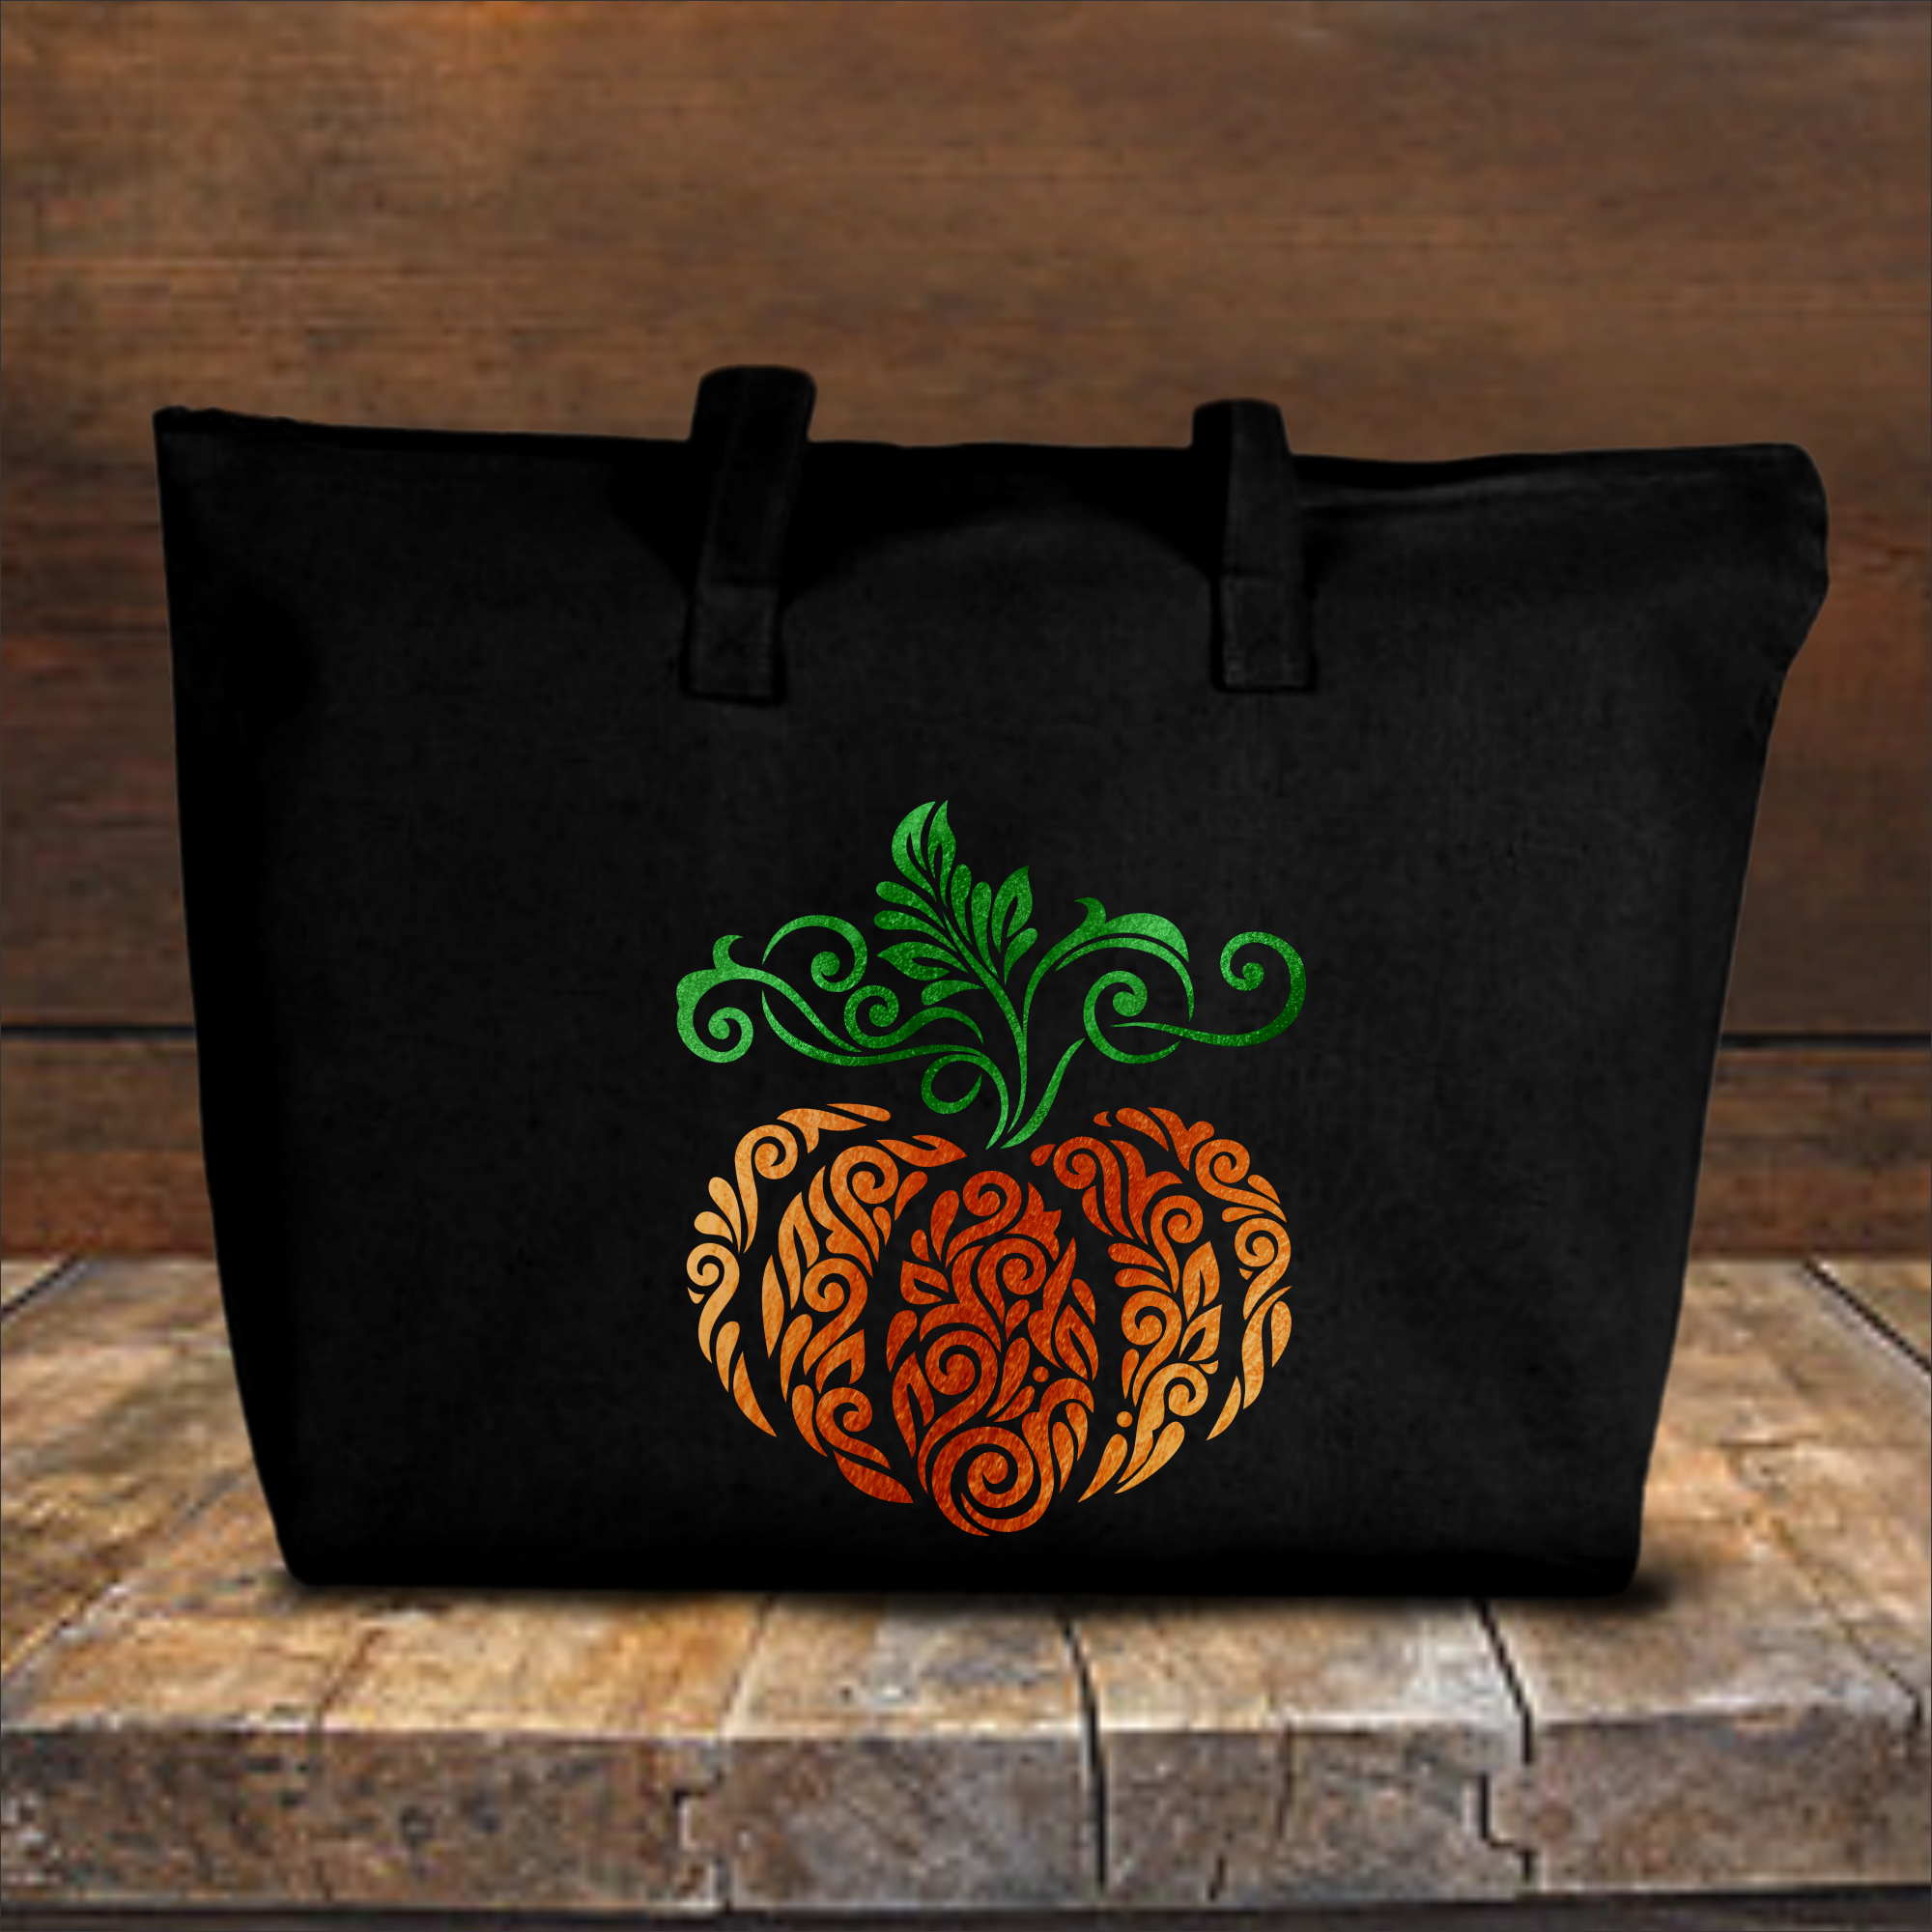 Fall Vibes Pumpkin Patch Signs Organic Cotton Tote Bag